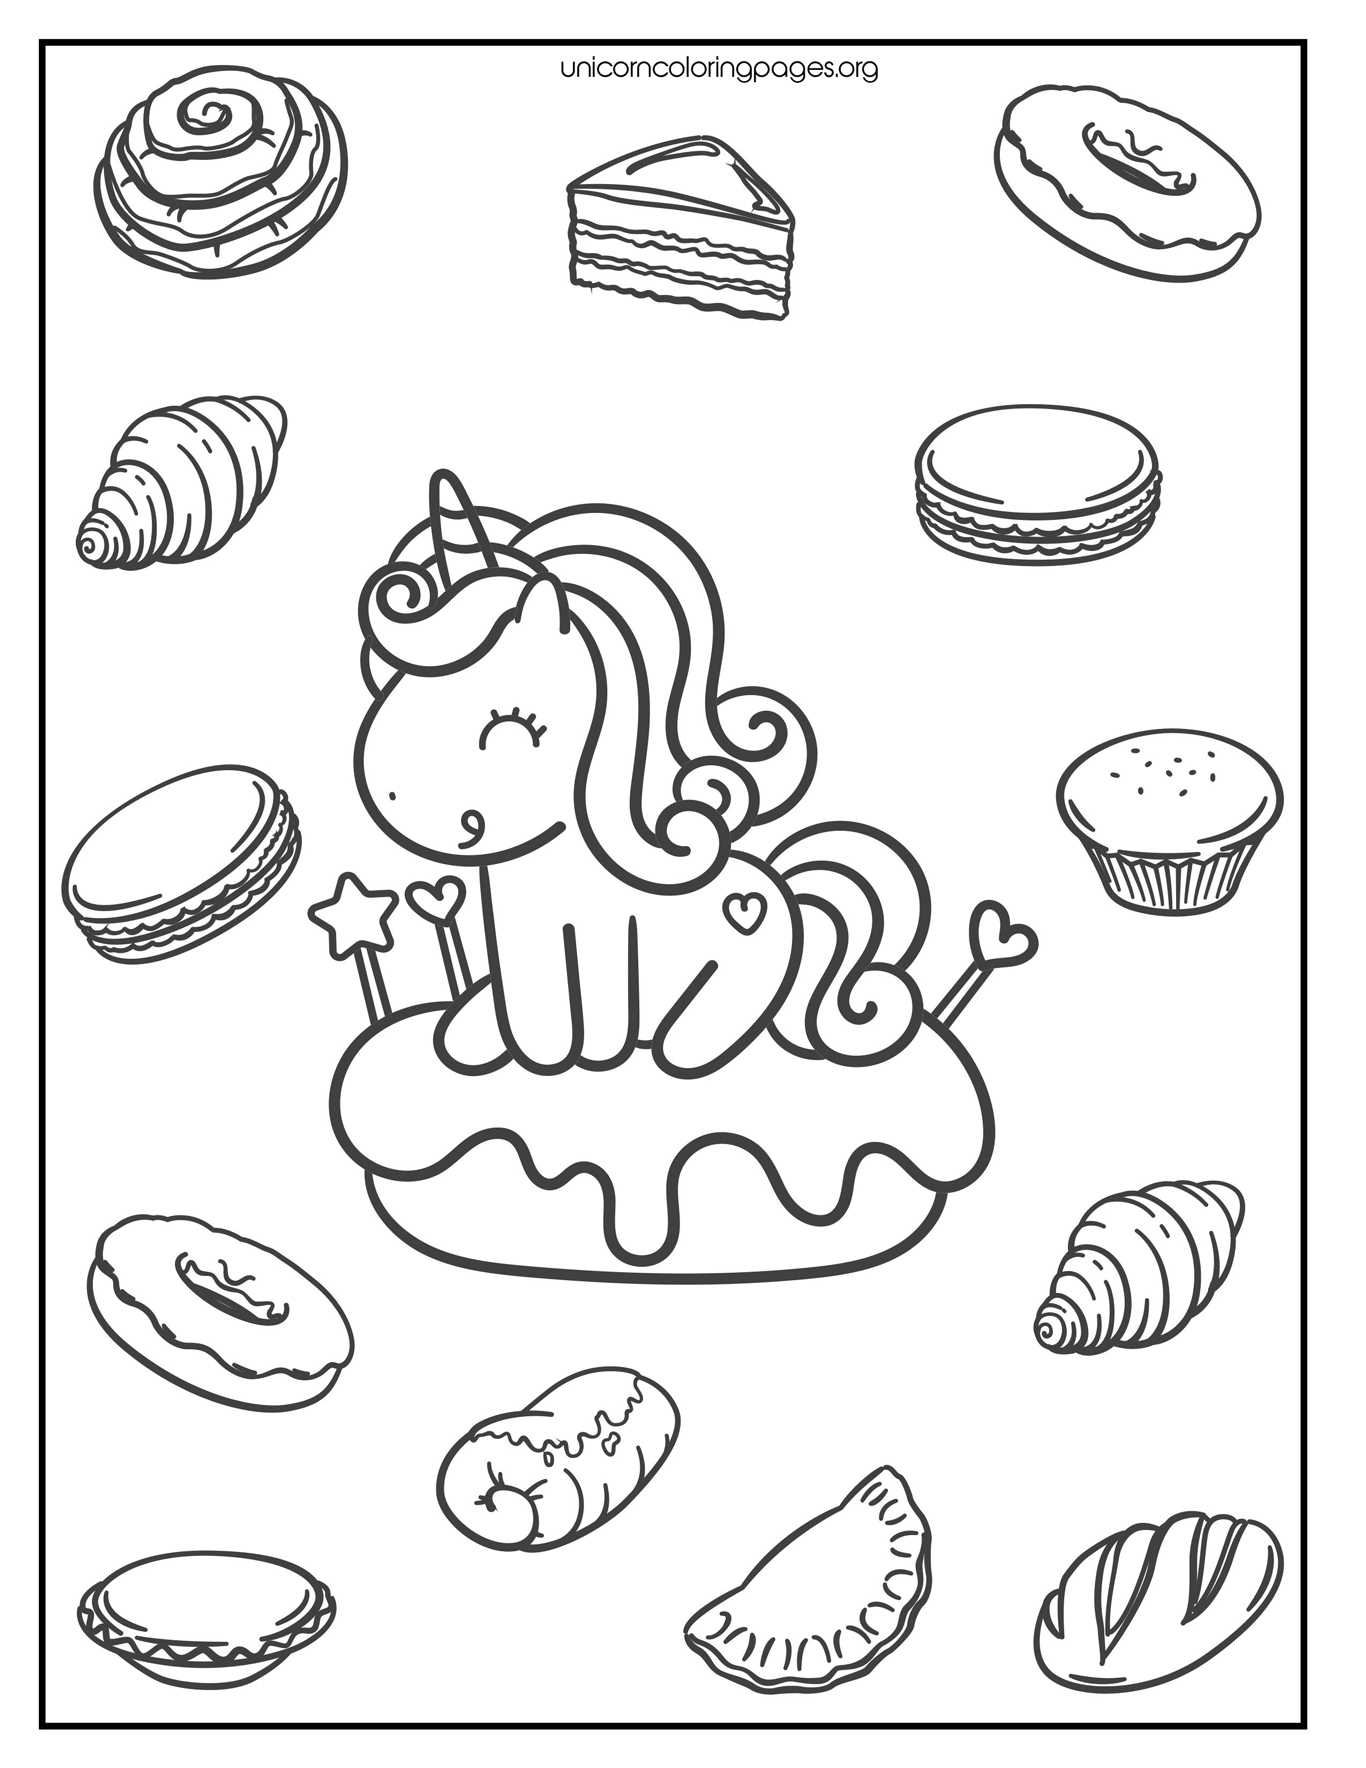 Free unicorn coloring pages pdf